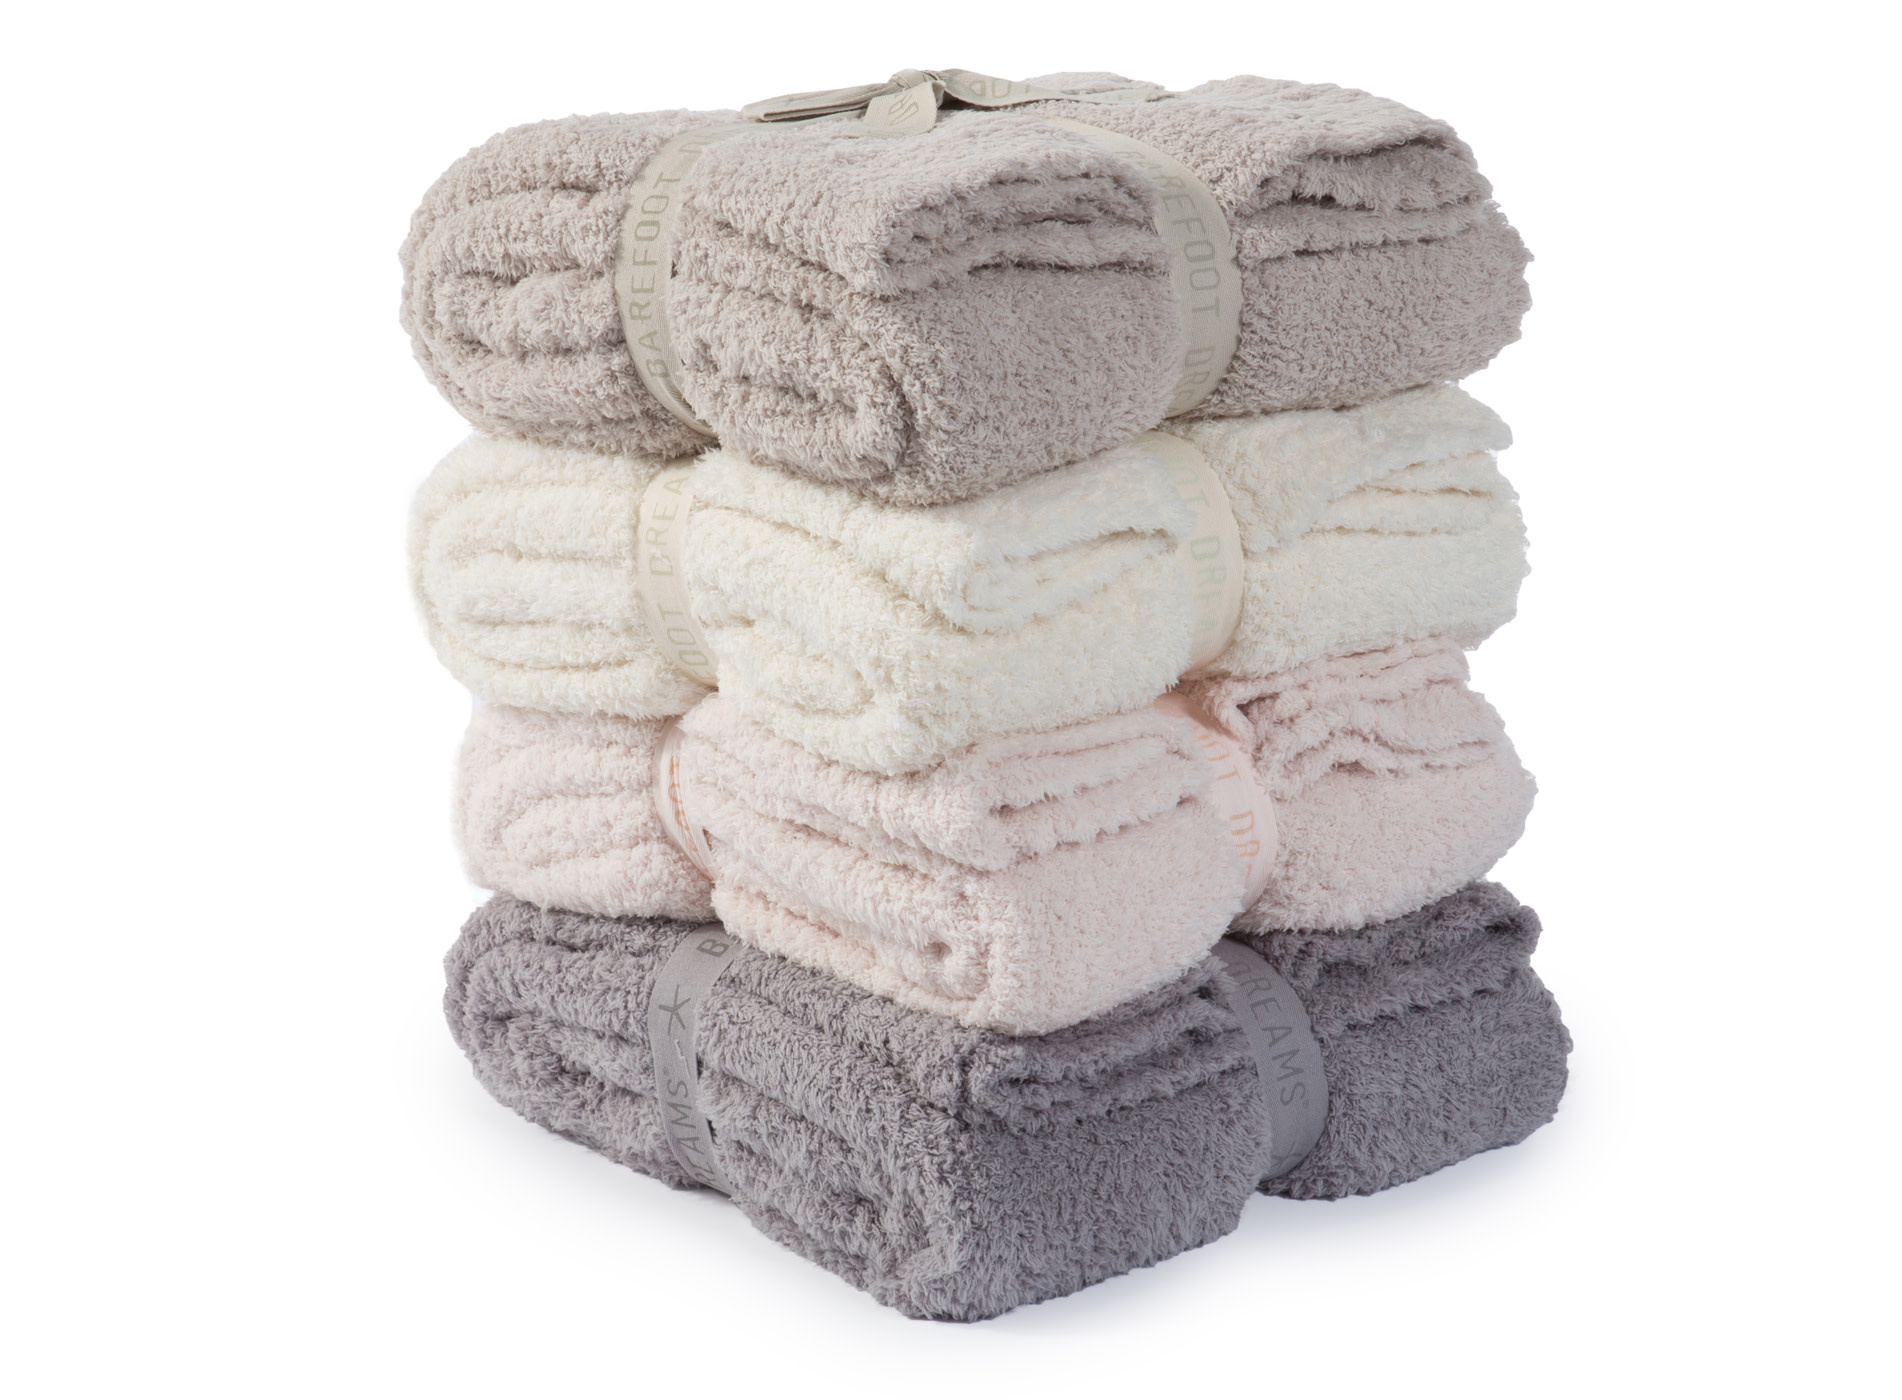 Barefoot Dreams  CozyChic Lite® Ribbed Baby Blanket - Charlotte's